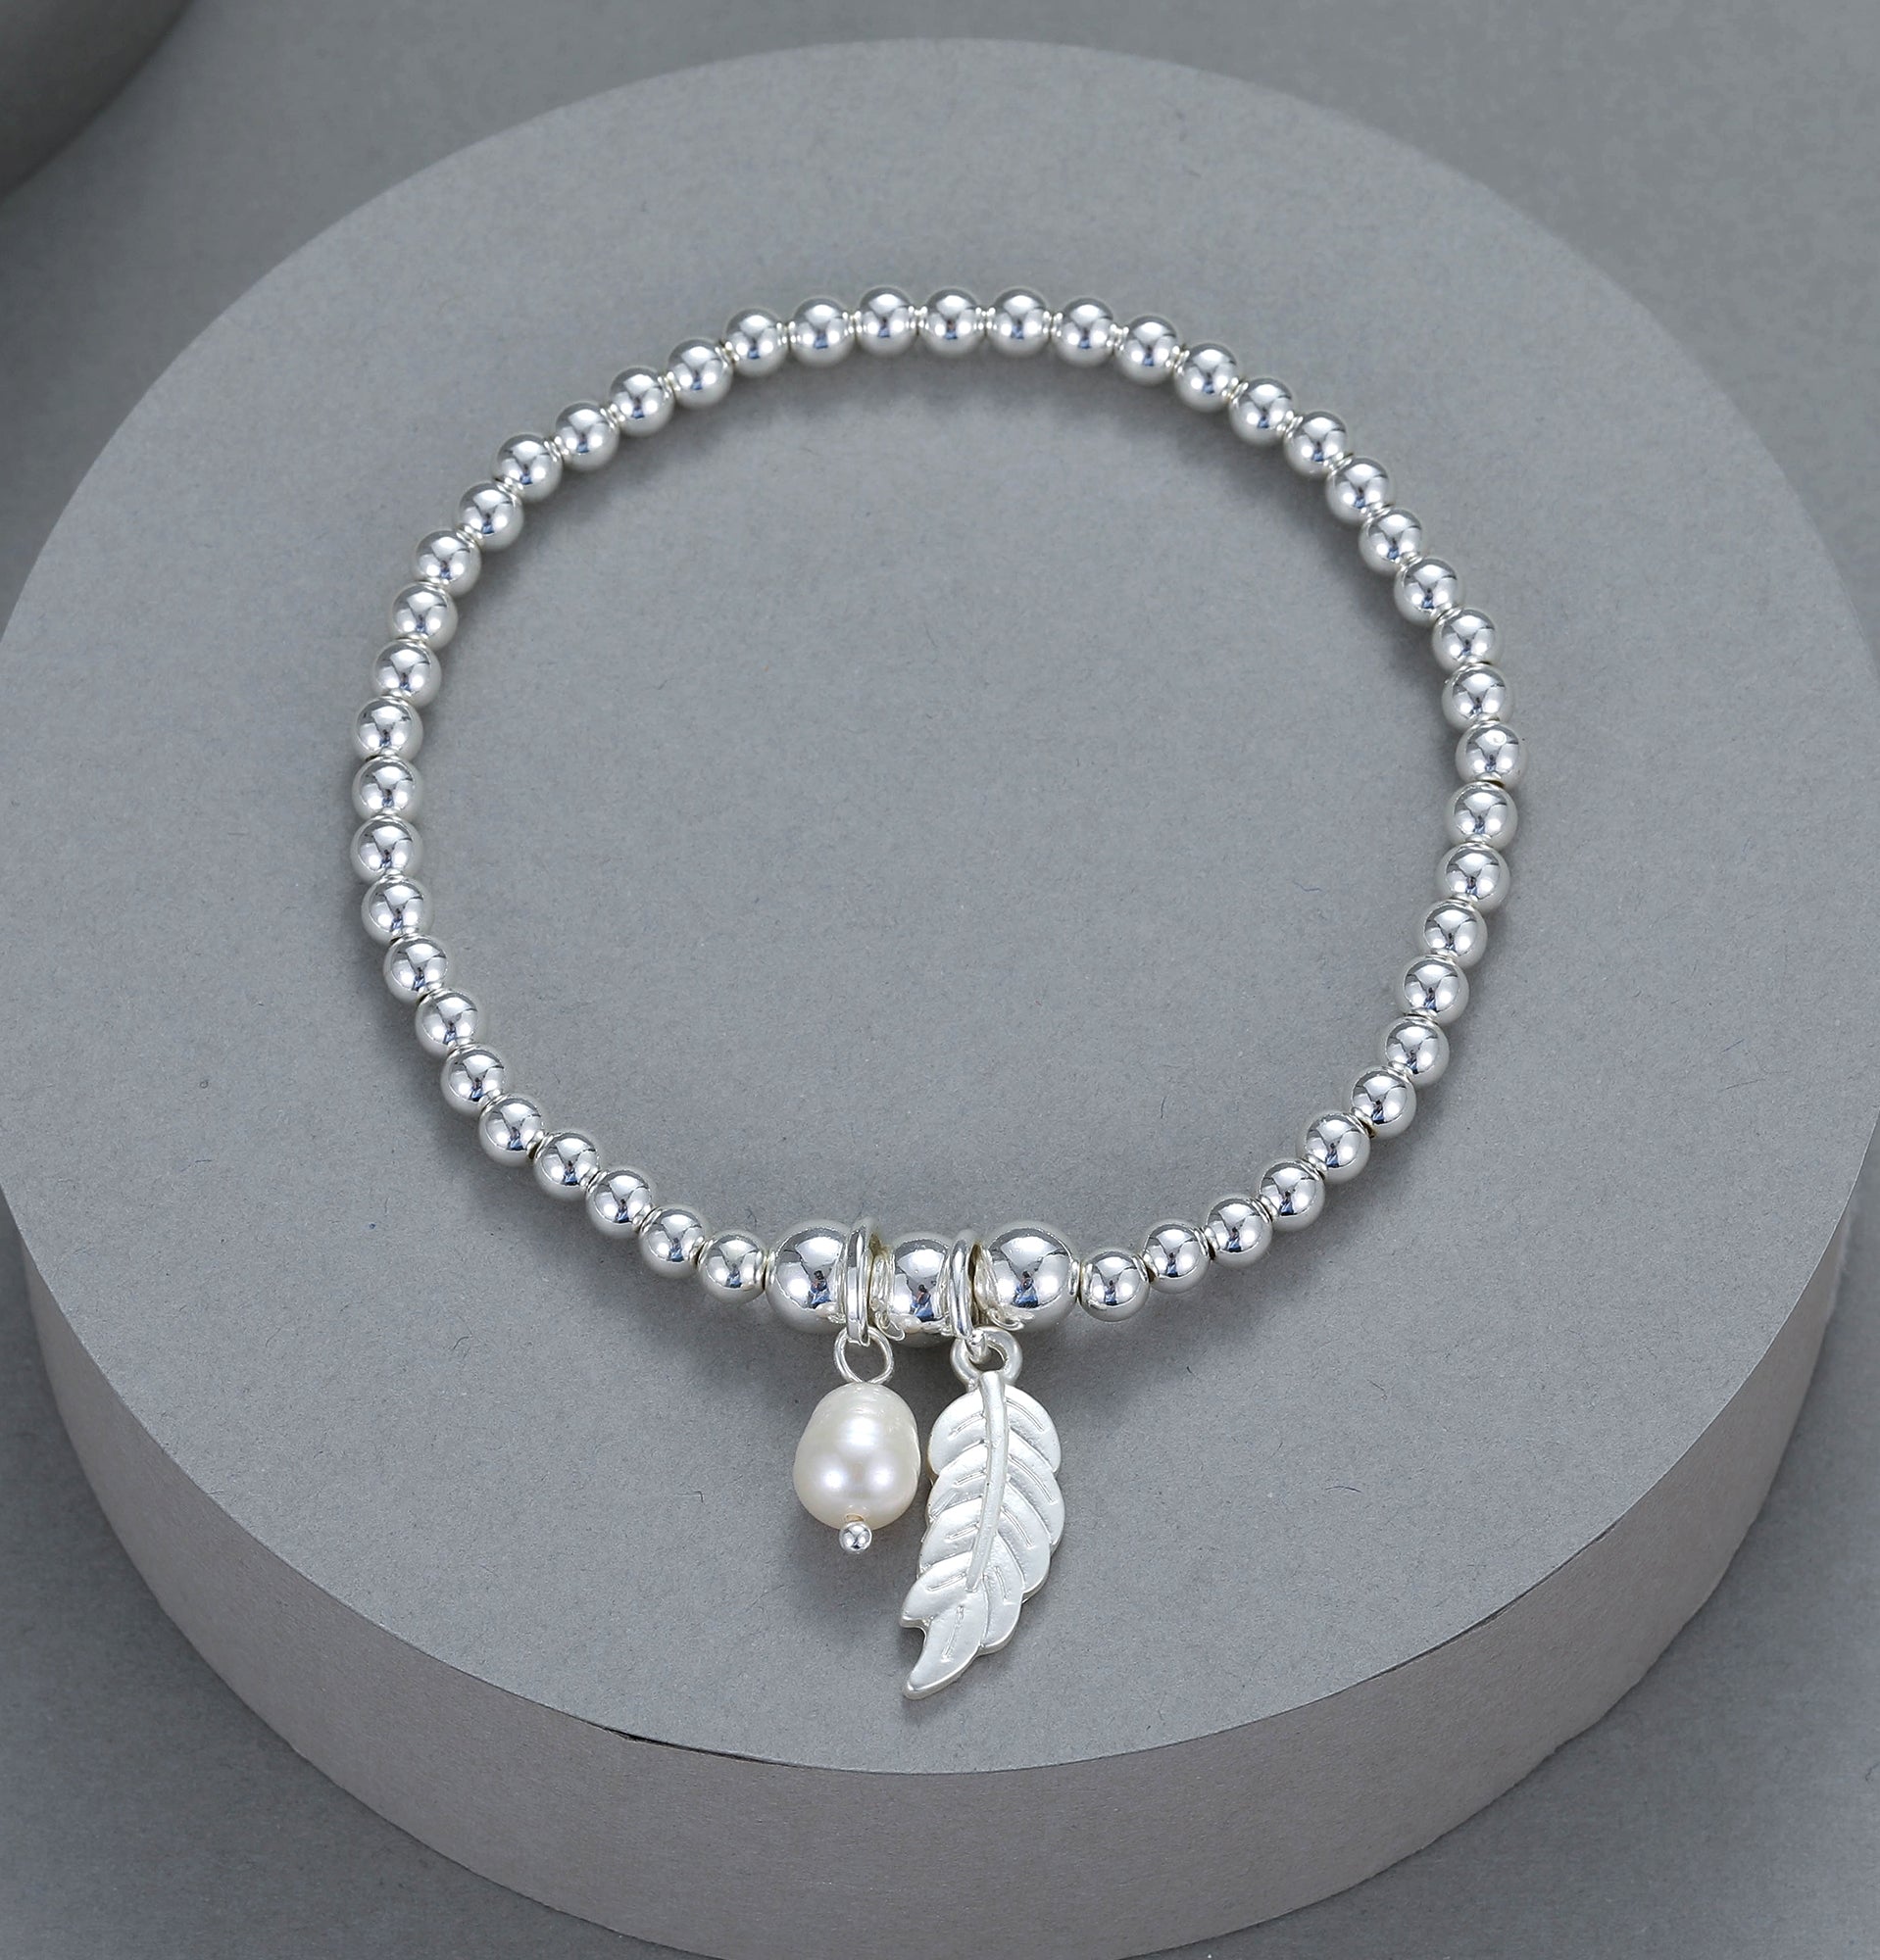 Elastic bracelet with feather and pearl pendant drop in silver